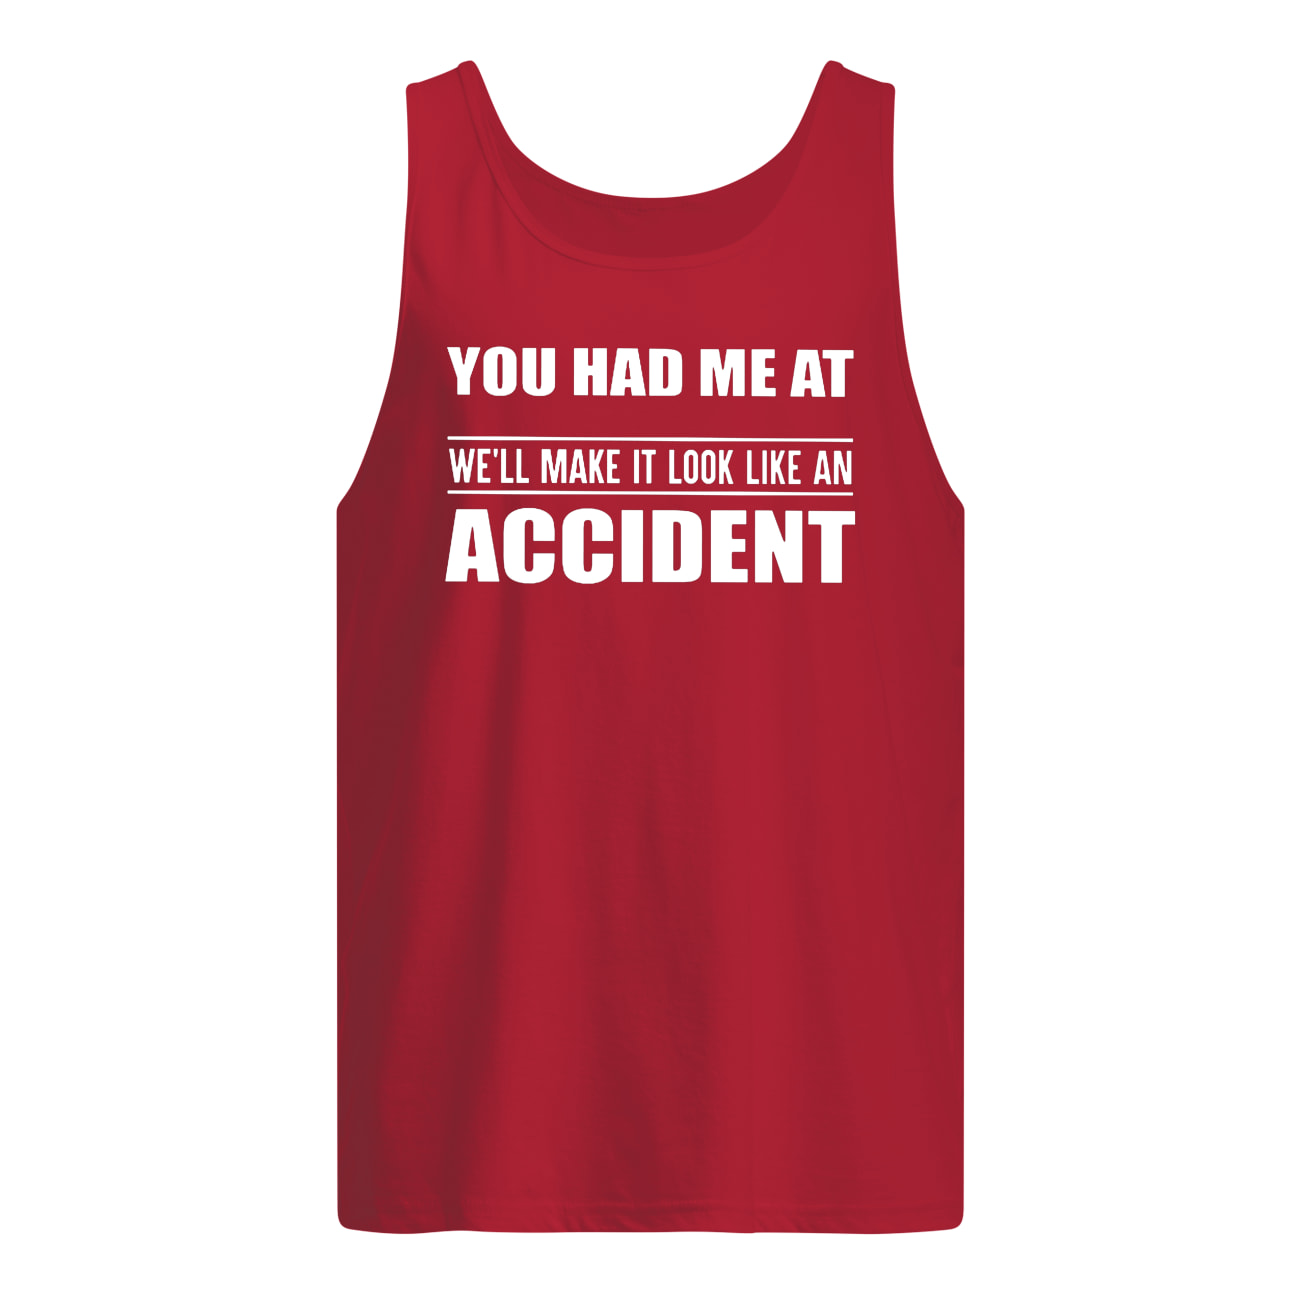 You had me at we'll make it look like an accident tank top